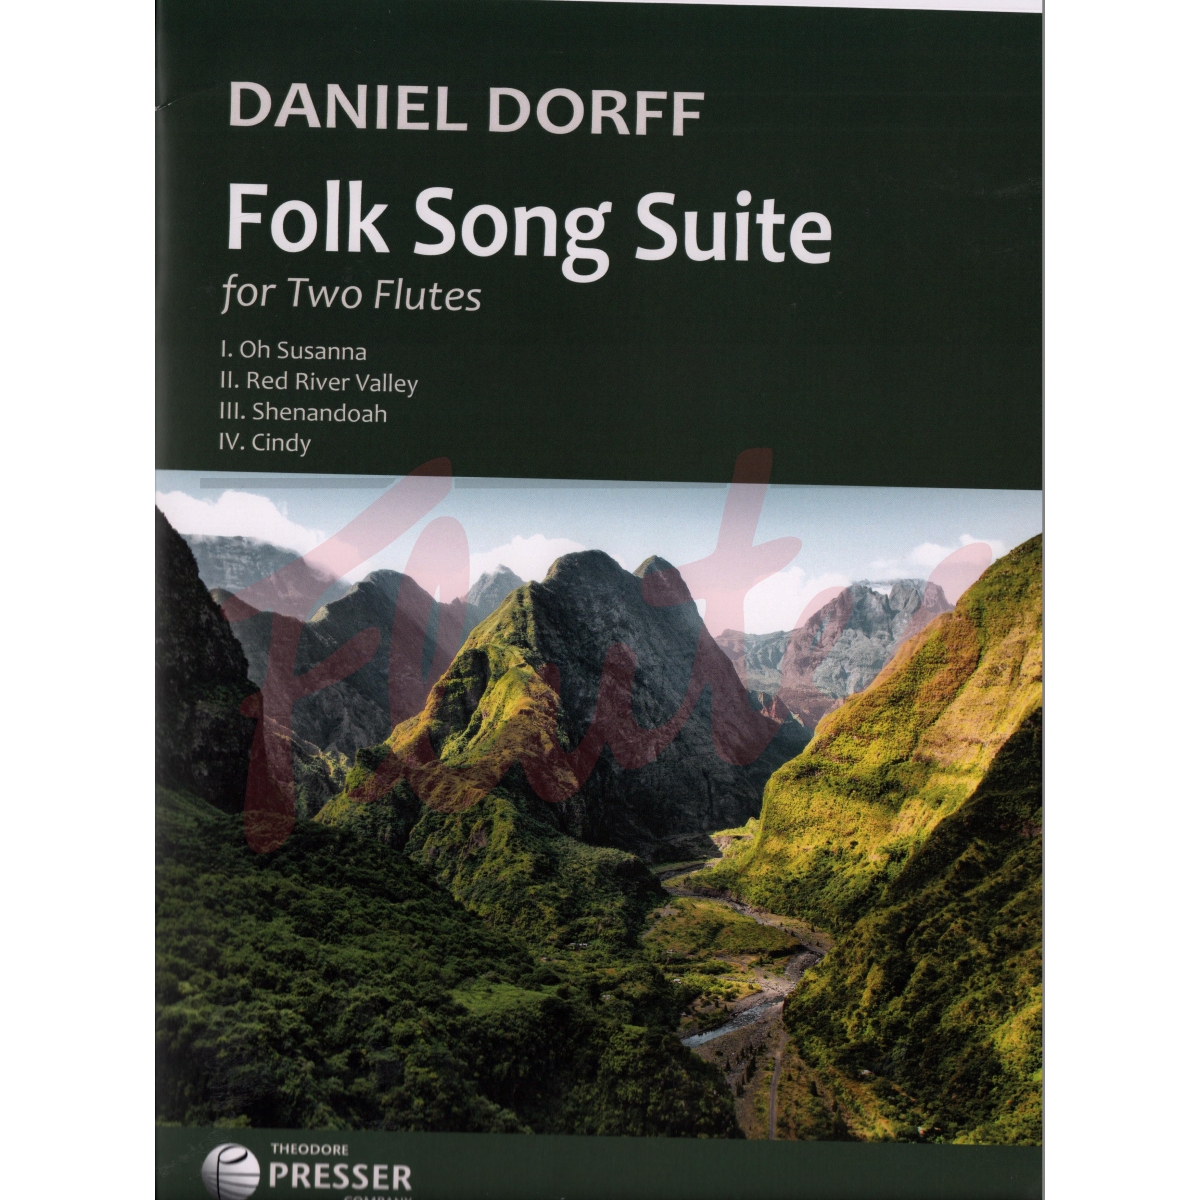 Folk Song Suite for Two Flutes